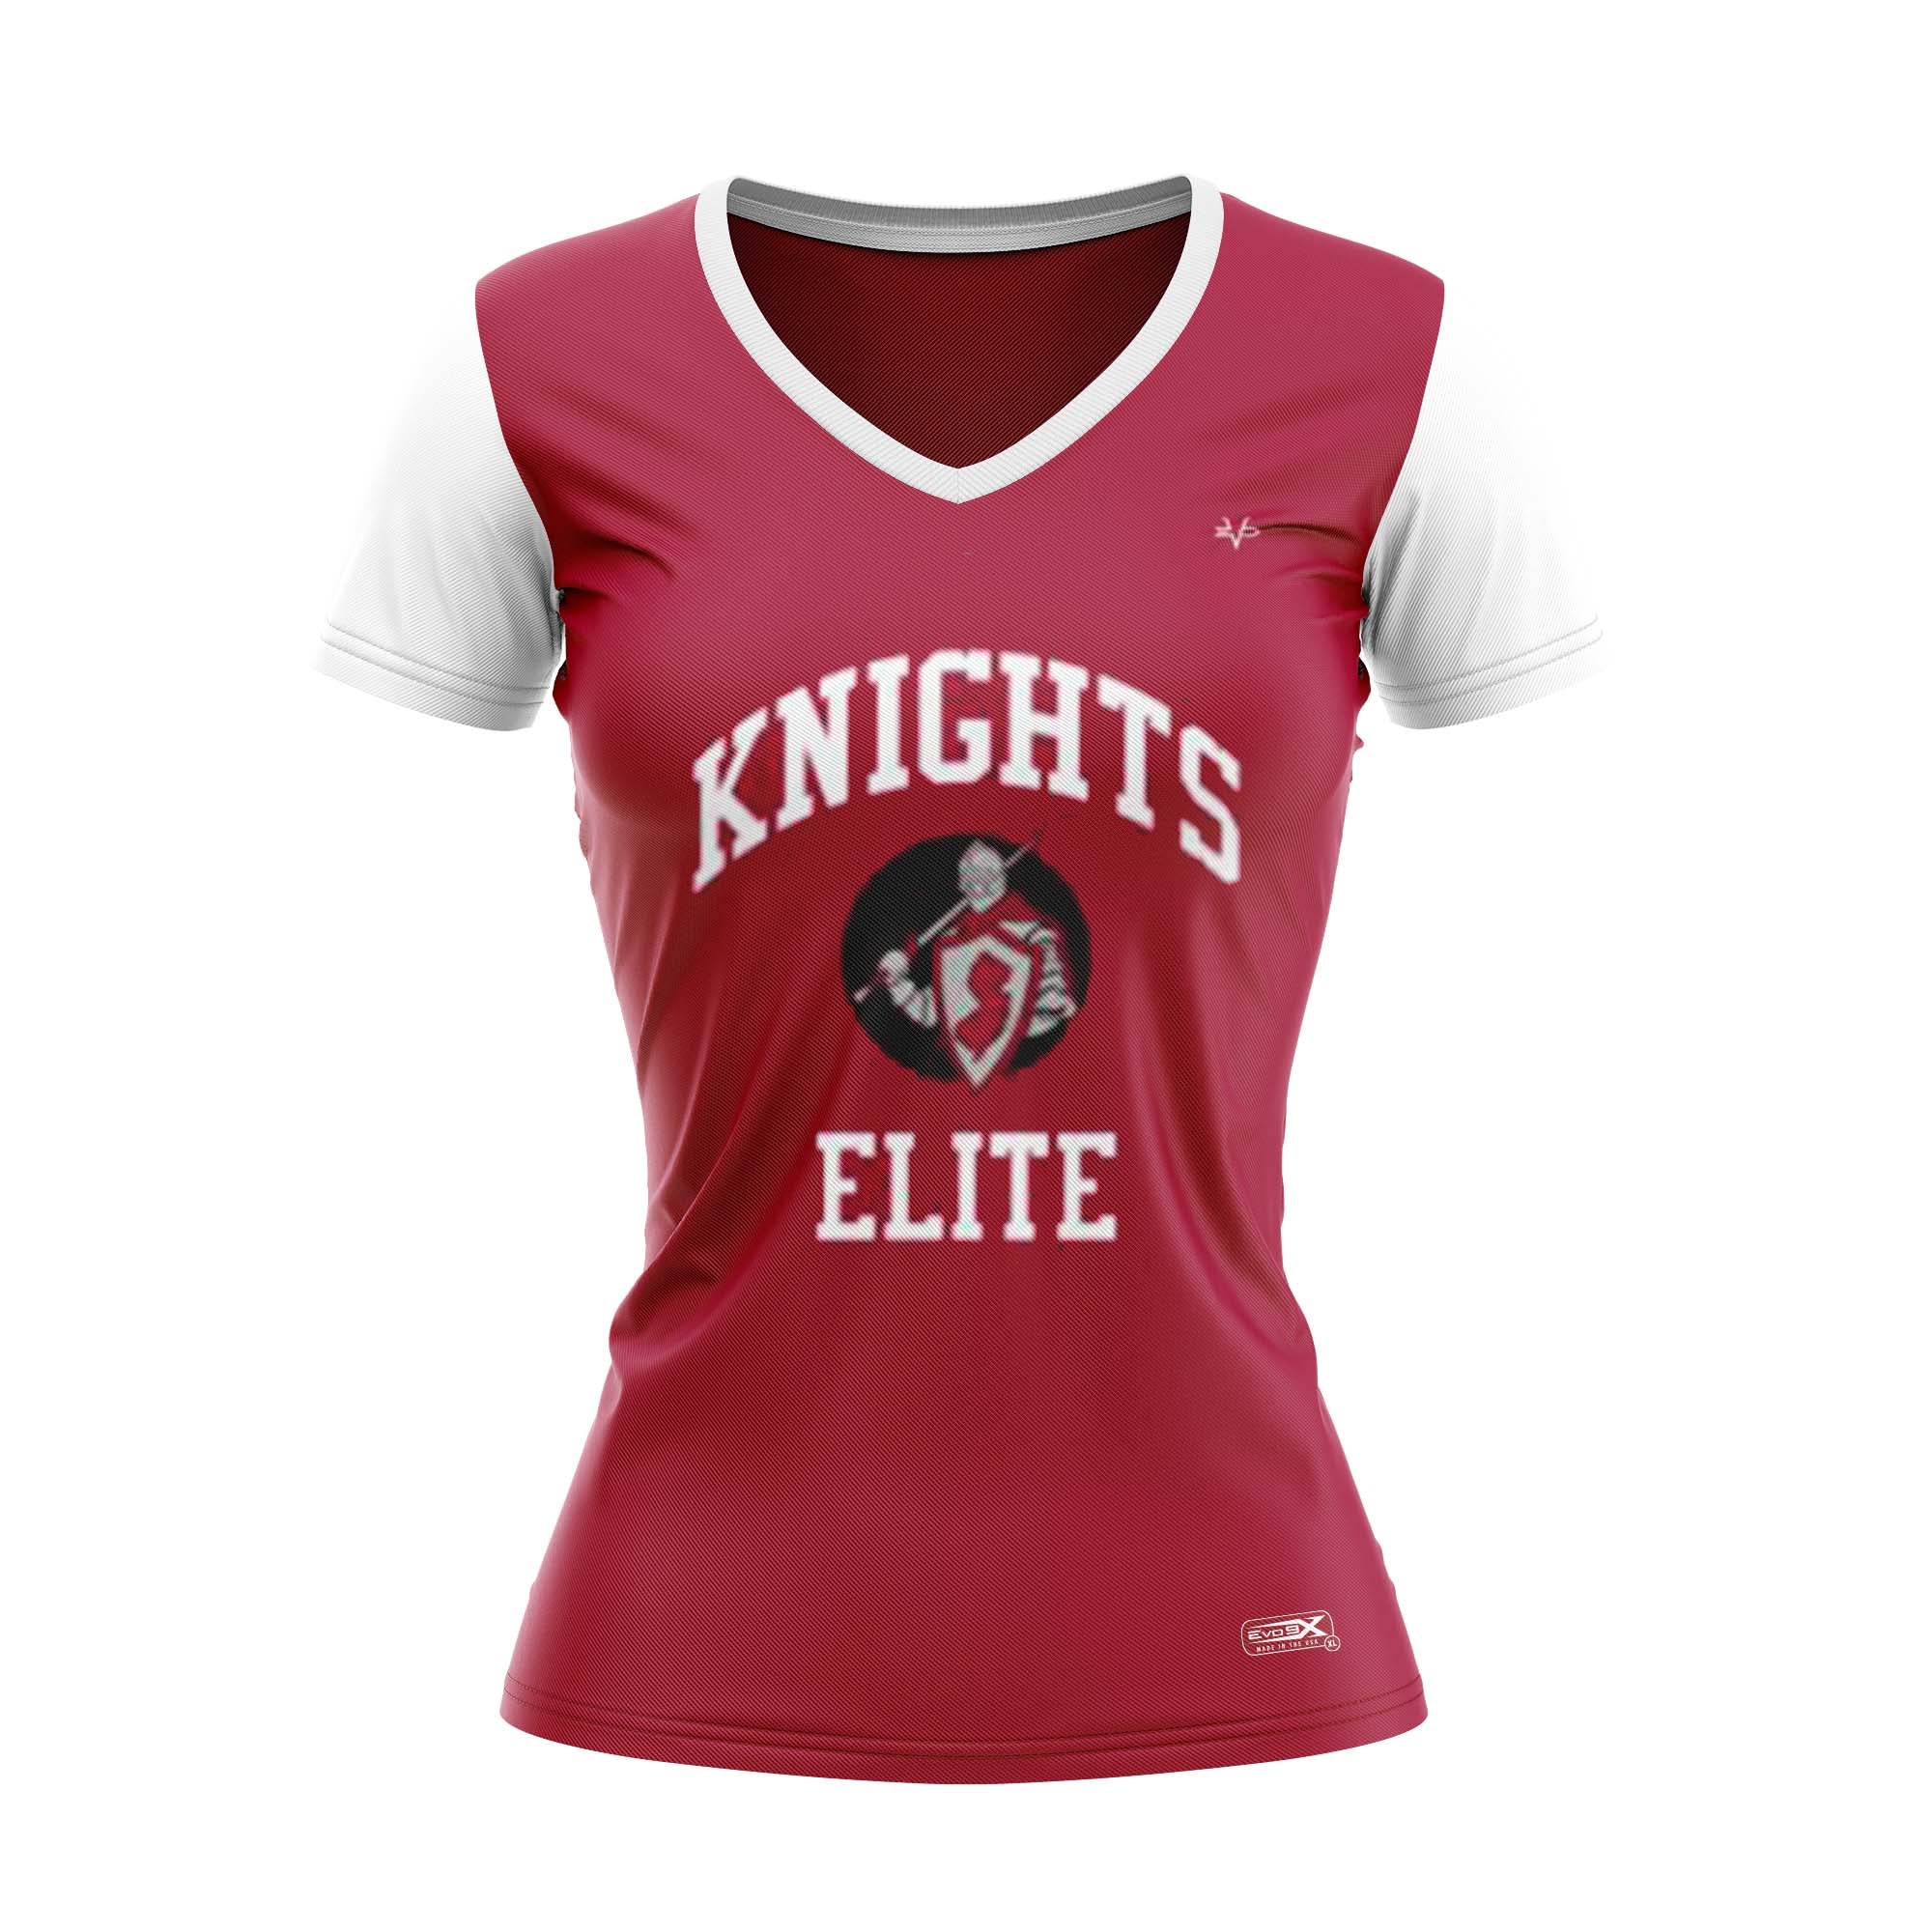 KNIGHTS ELITE Football Sublimated Women's Cap sleeve Jersey Red/White